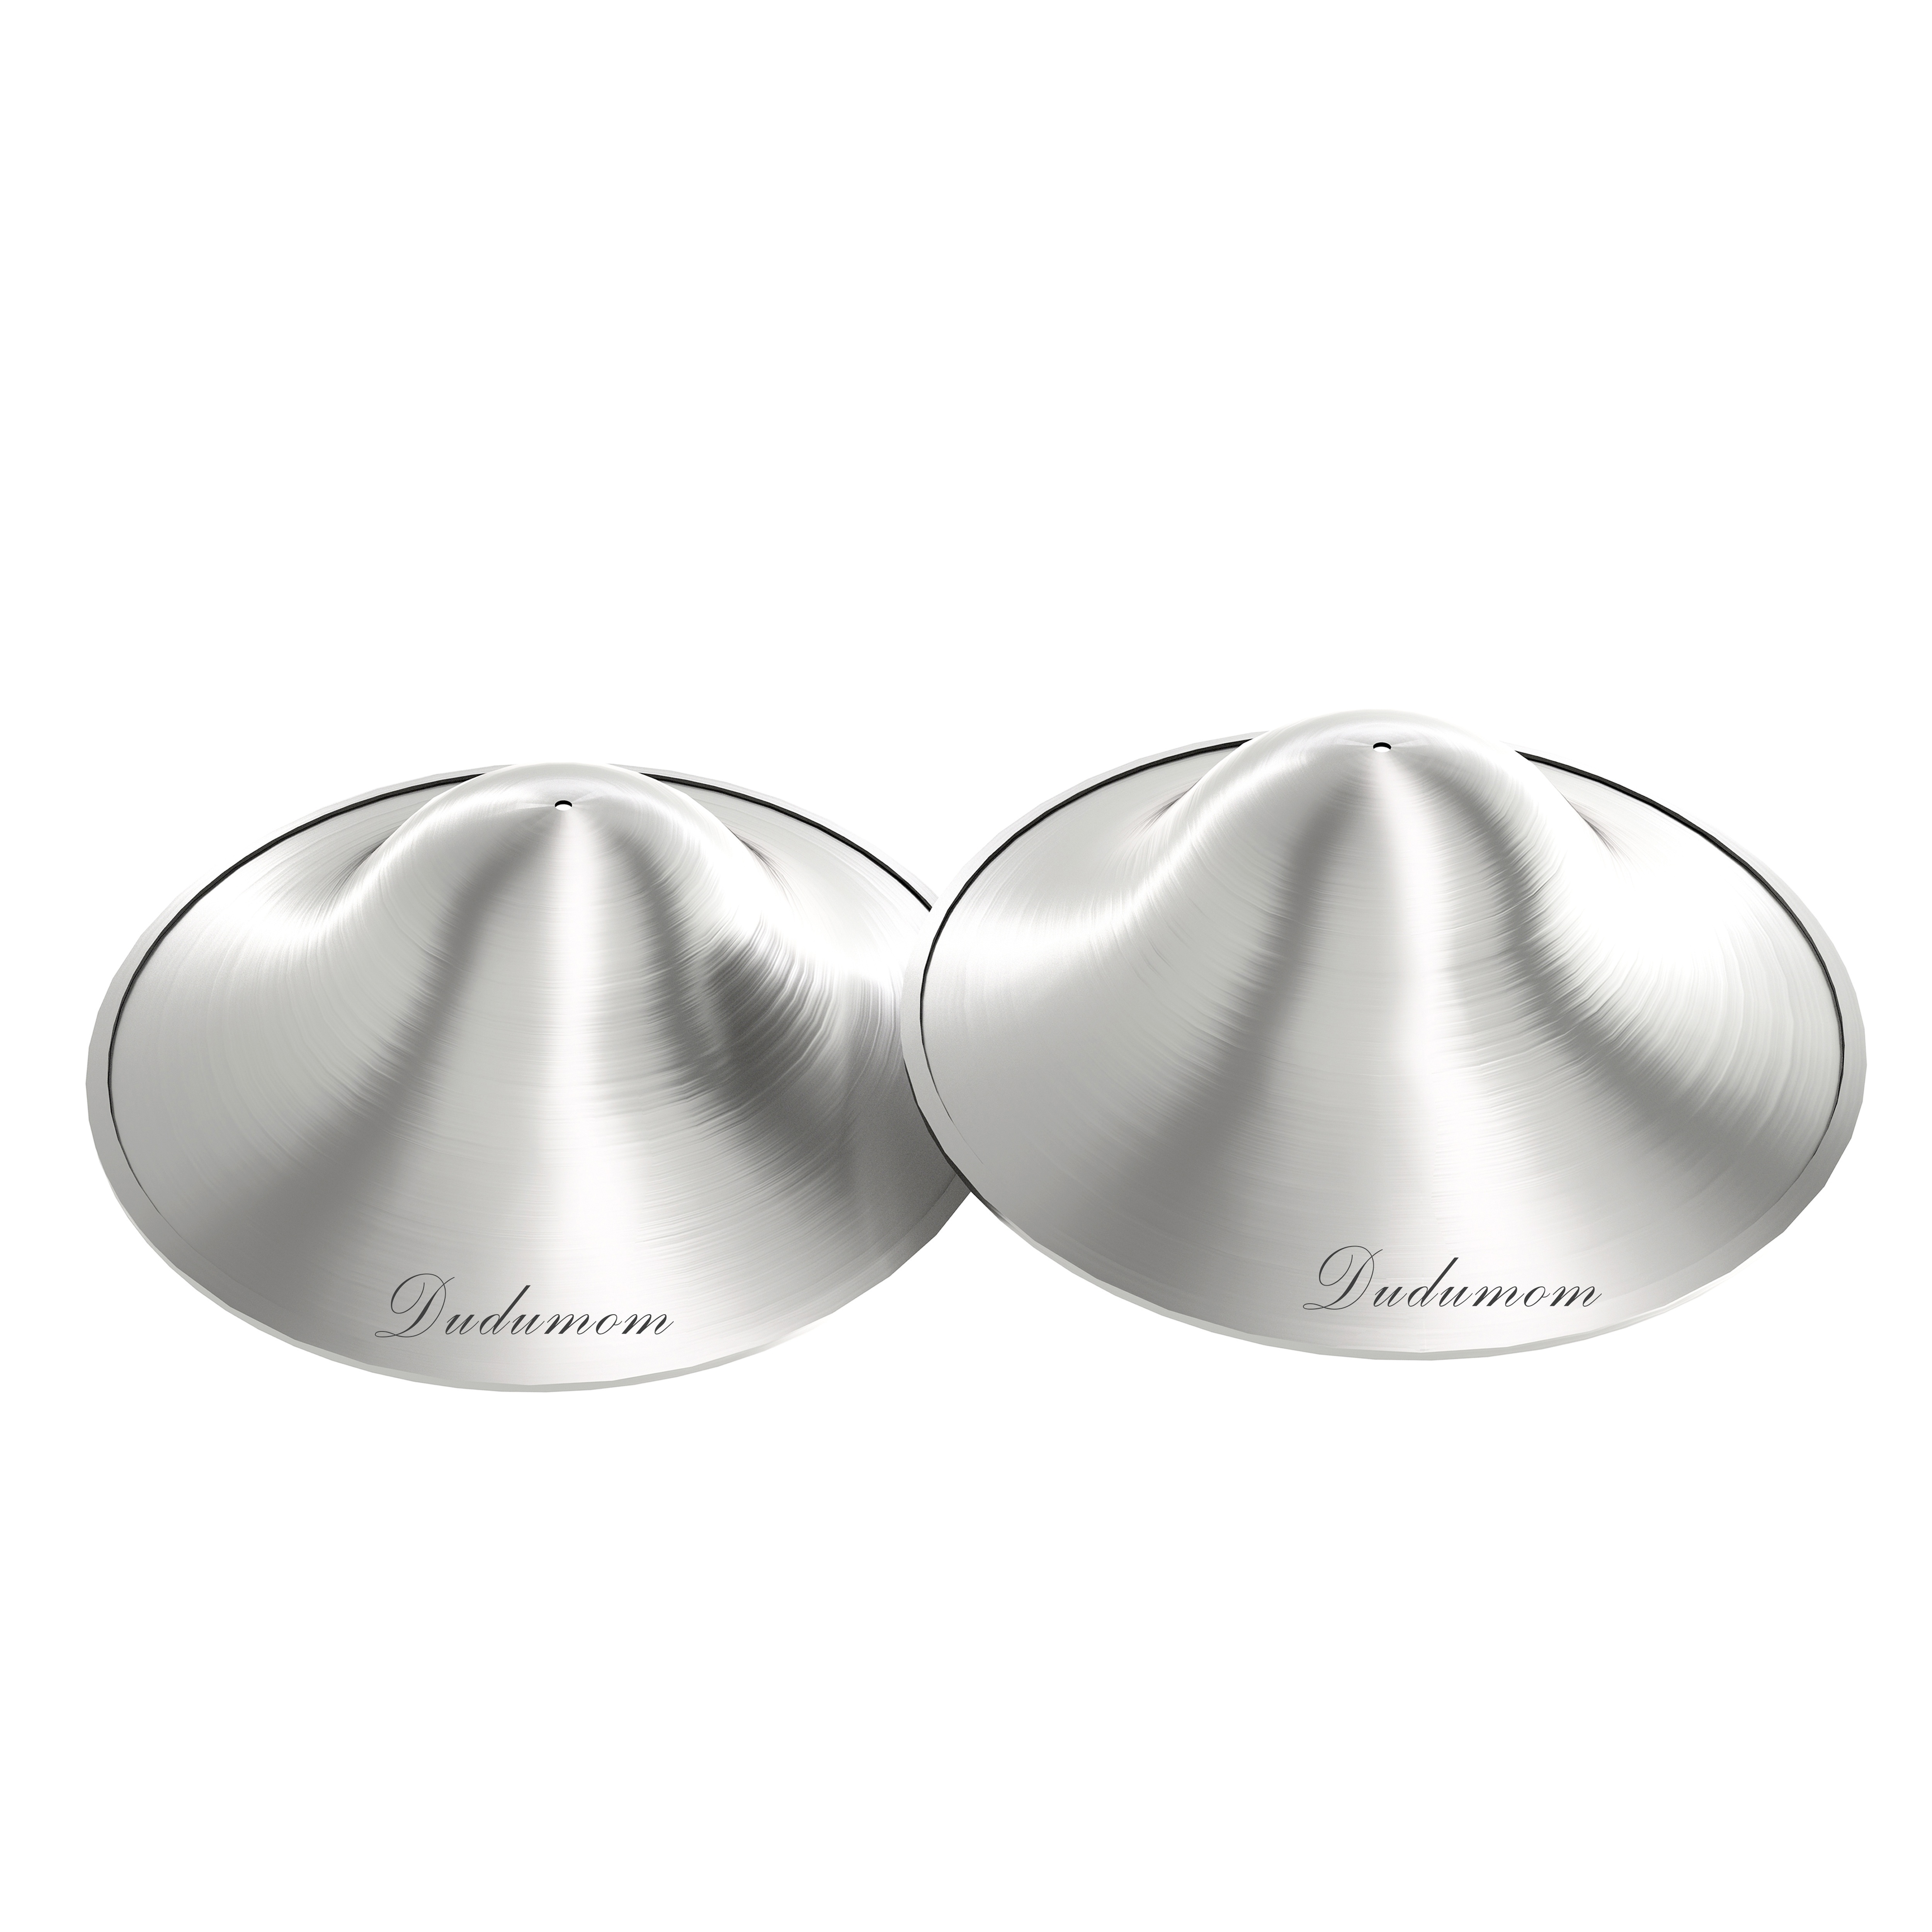 

2pcs Silver Nipple Nickelfree - Silver Cups Breastfeeding For Nursing Newborn - Protect And Soothe Your Nursing Nipples